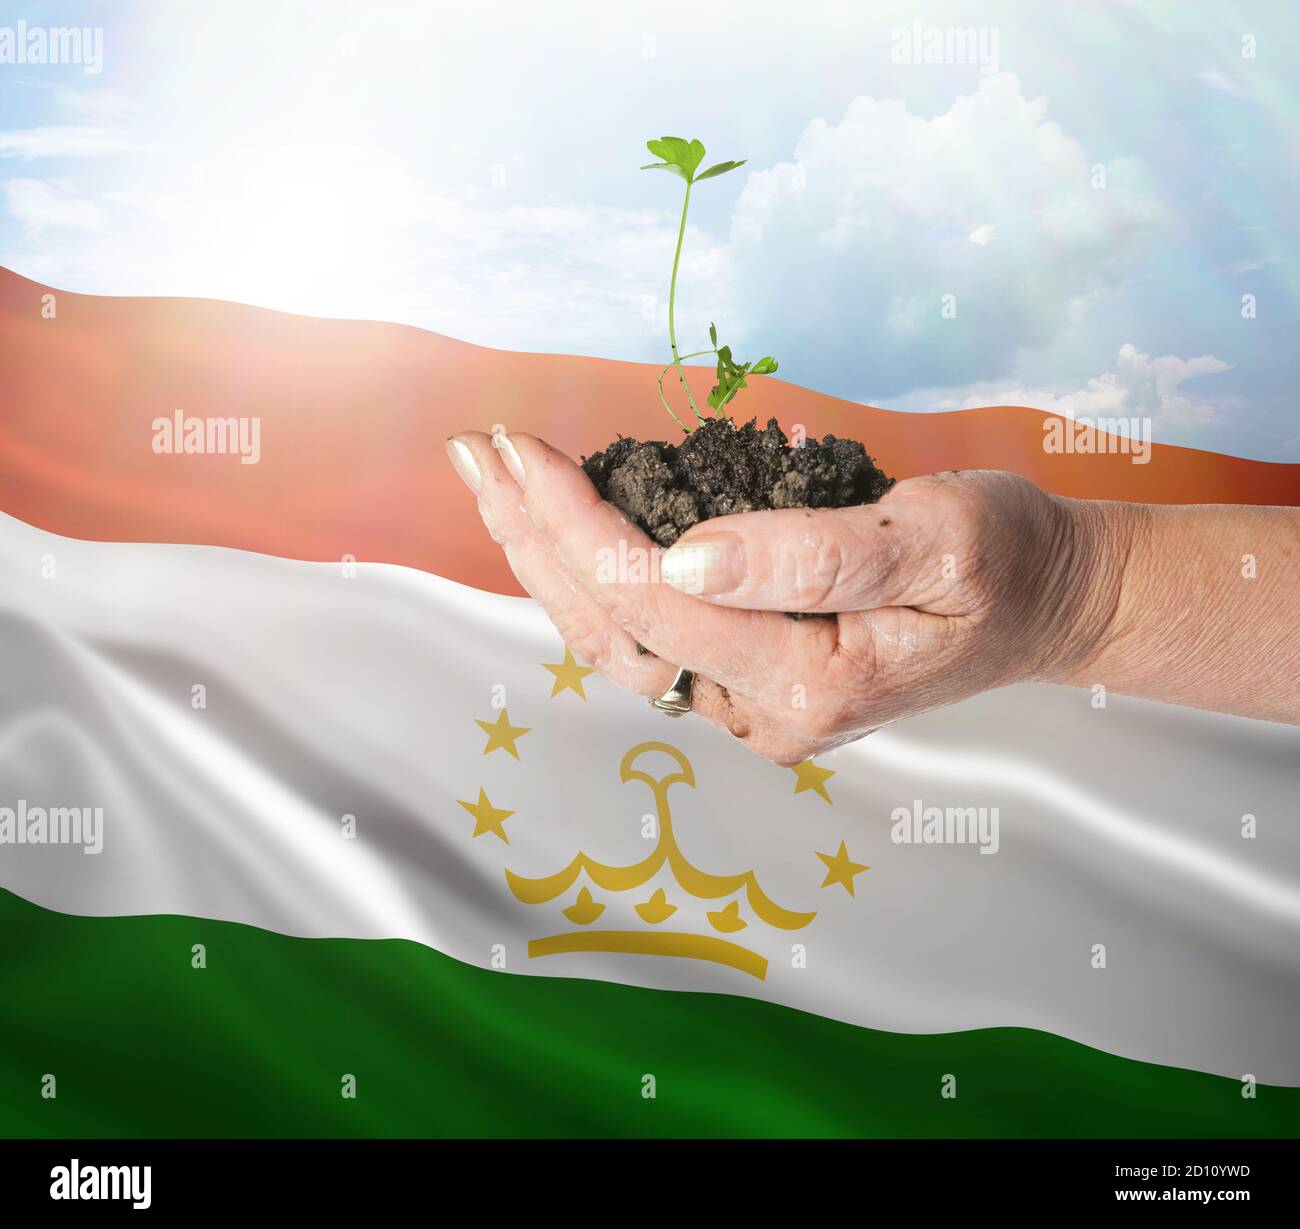 Tajikistan growth and new beginning. Green renewable energy and ecology concept. Hand holding young plant. Stock Photo